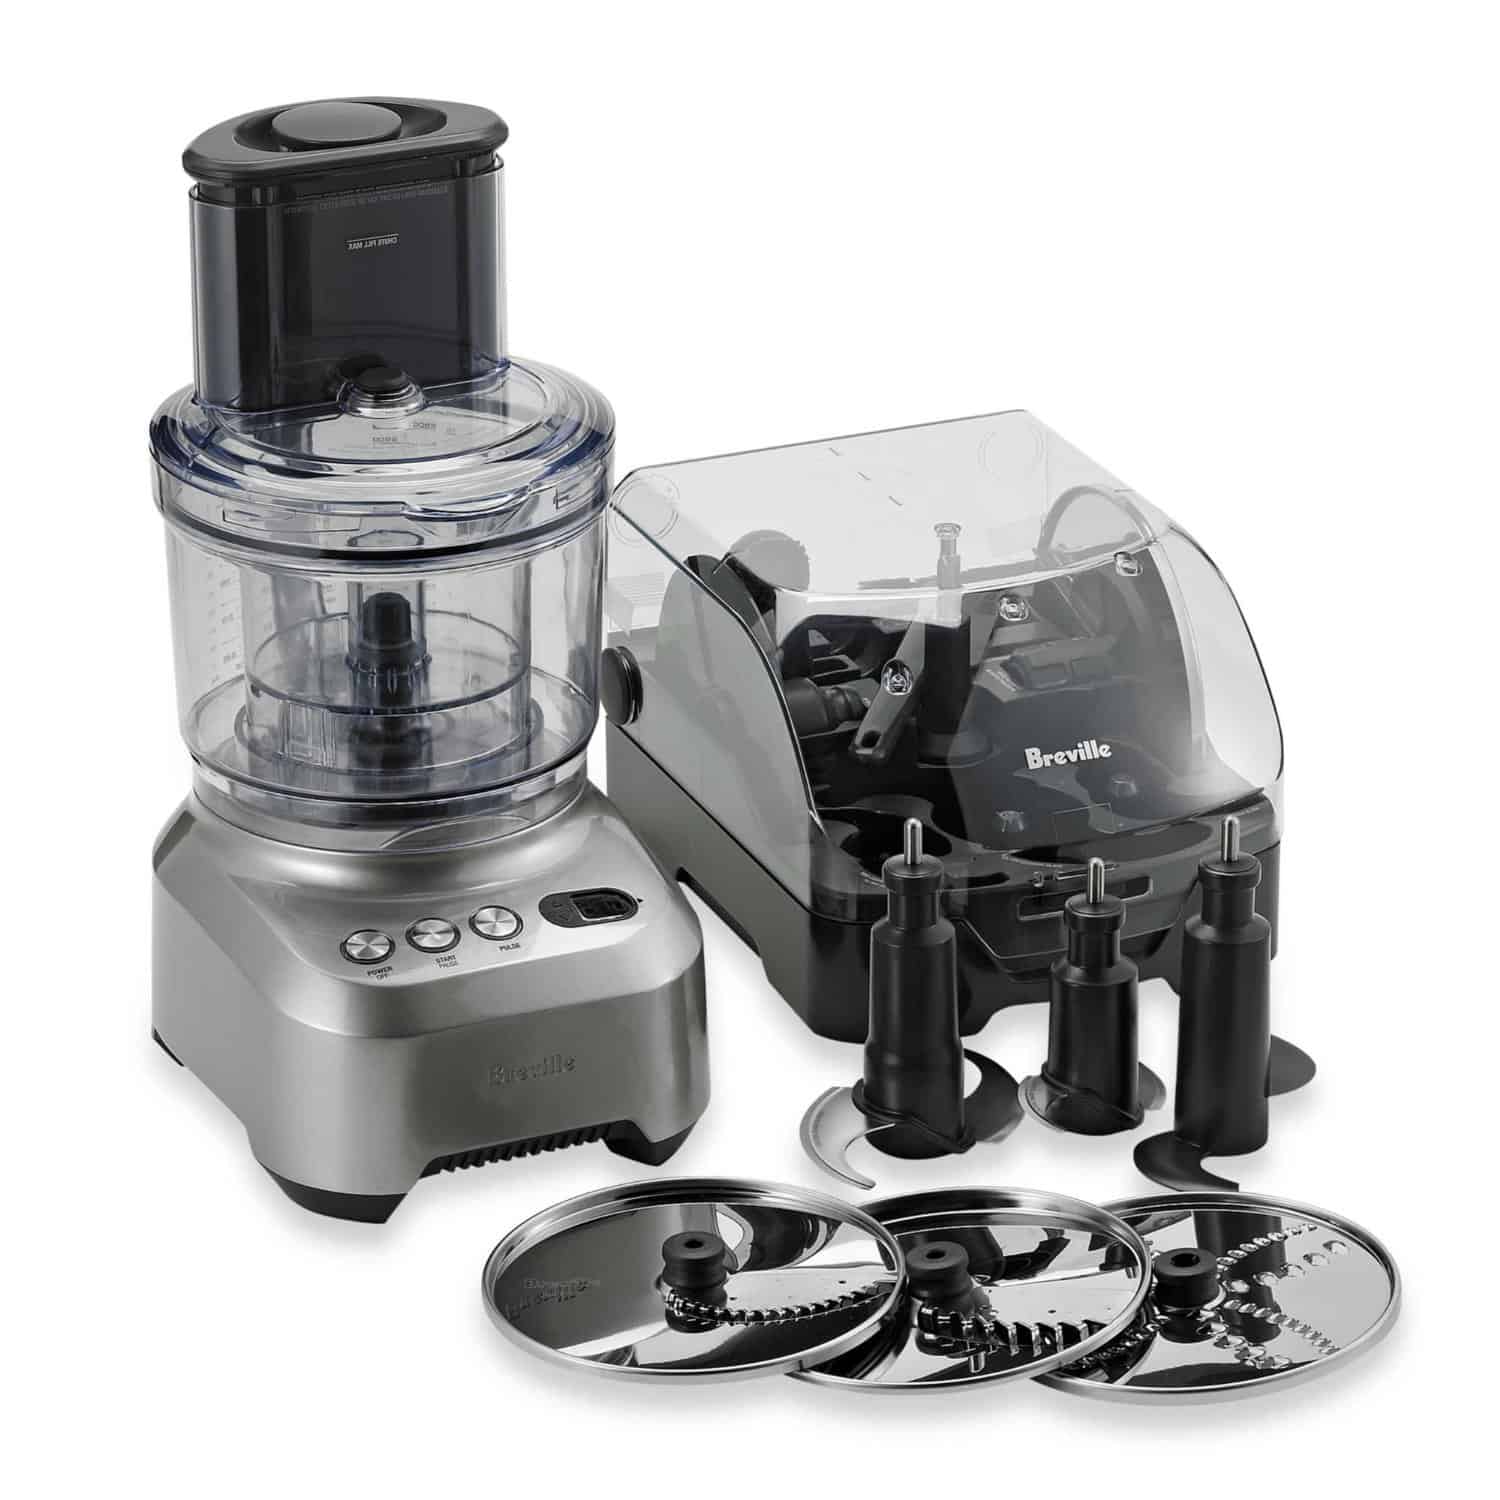 Best Breville Food Processor | 2019 Reviews and Customer Opinions